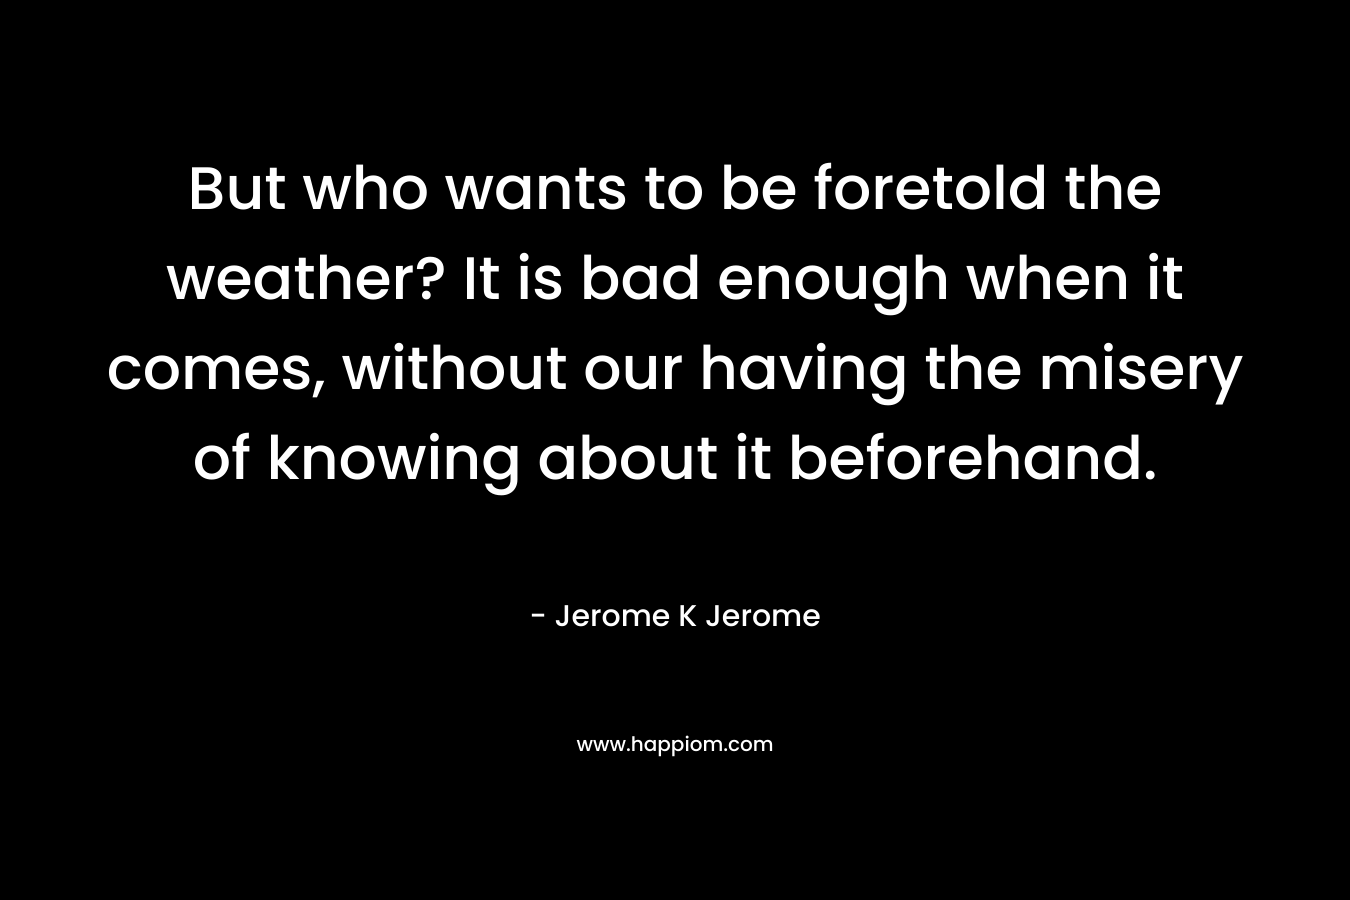 But who wants to be foretold the weather? It is bad enough when it comes, without our having the misery of knowing about it beforehand. – Jerome K Jerome